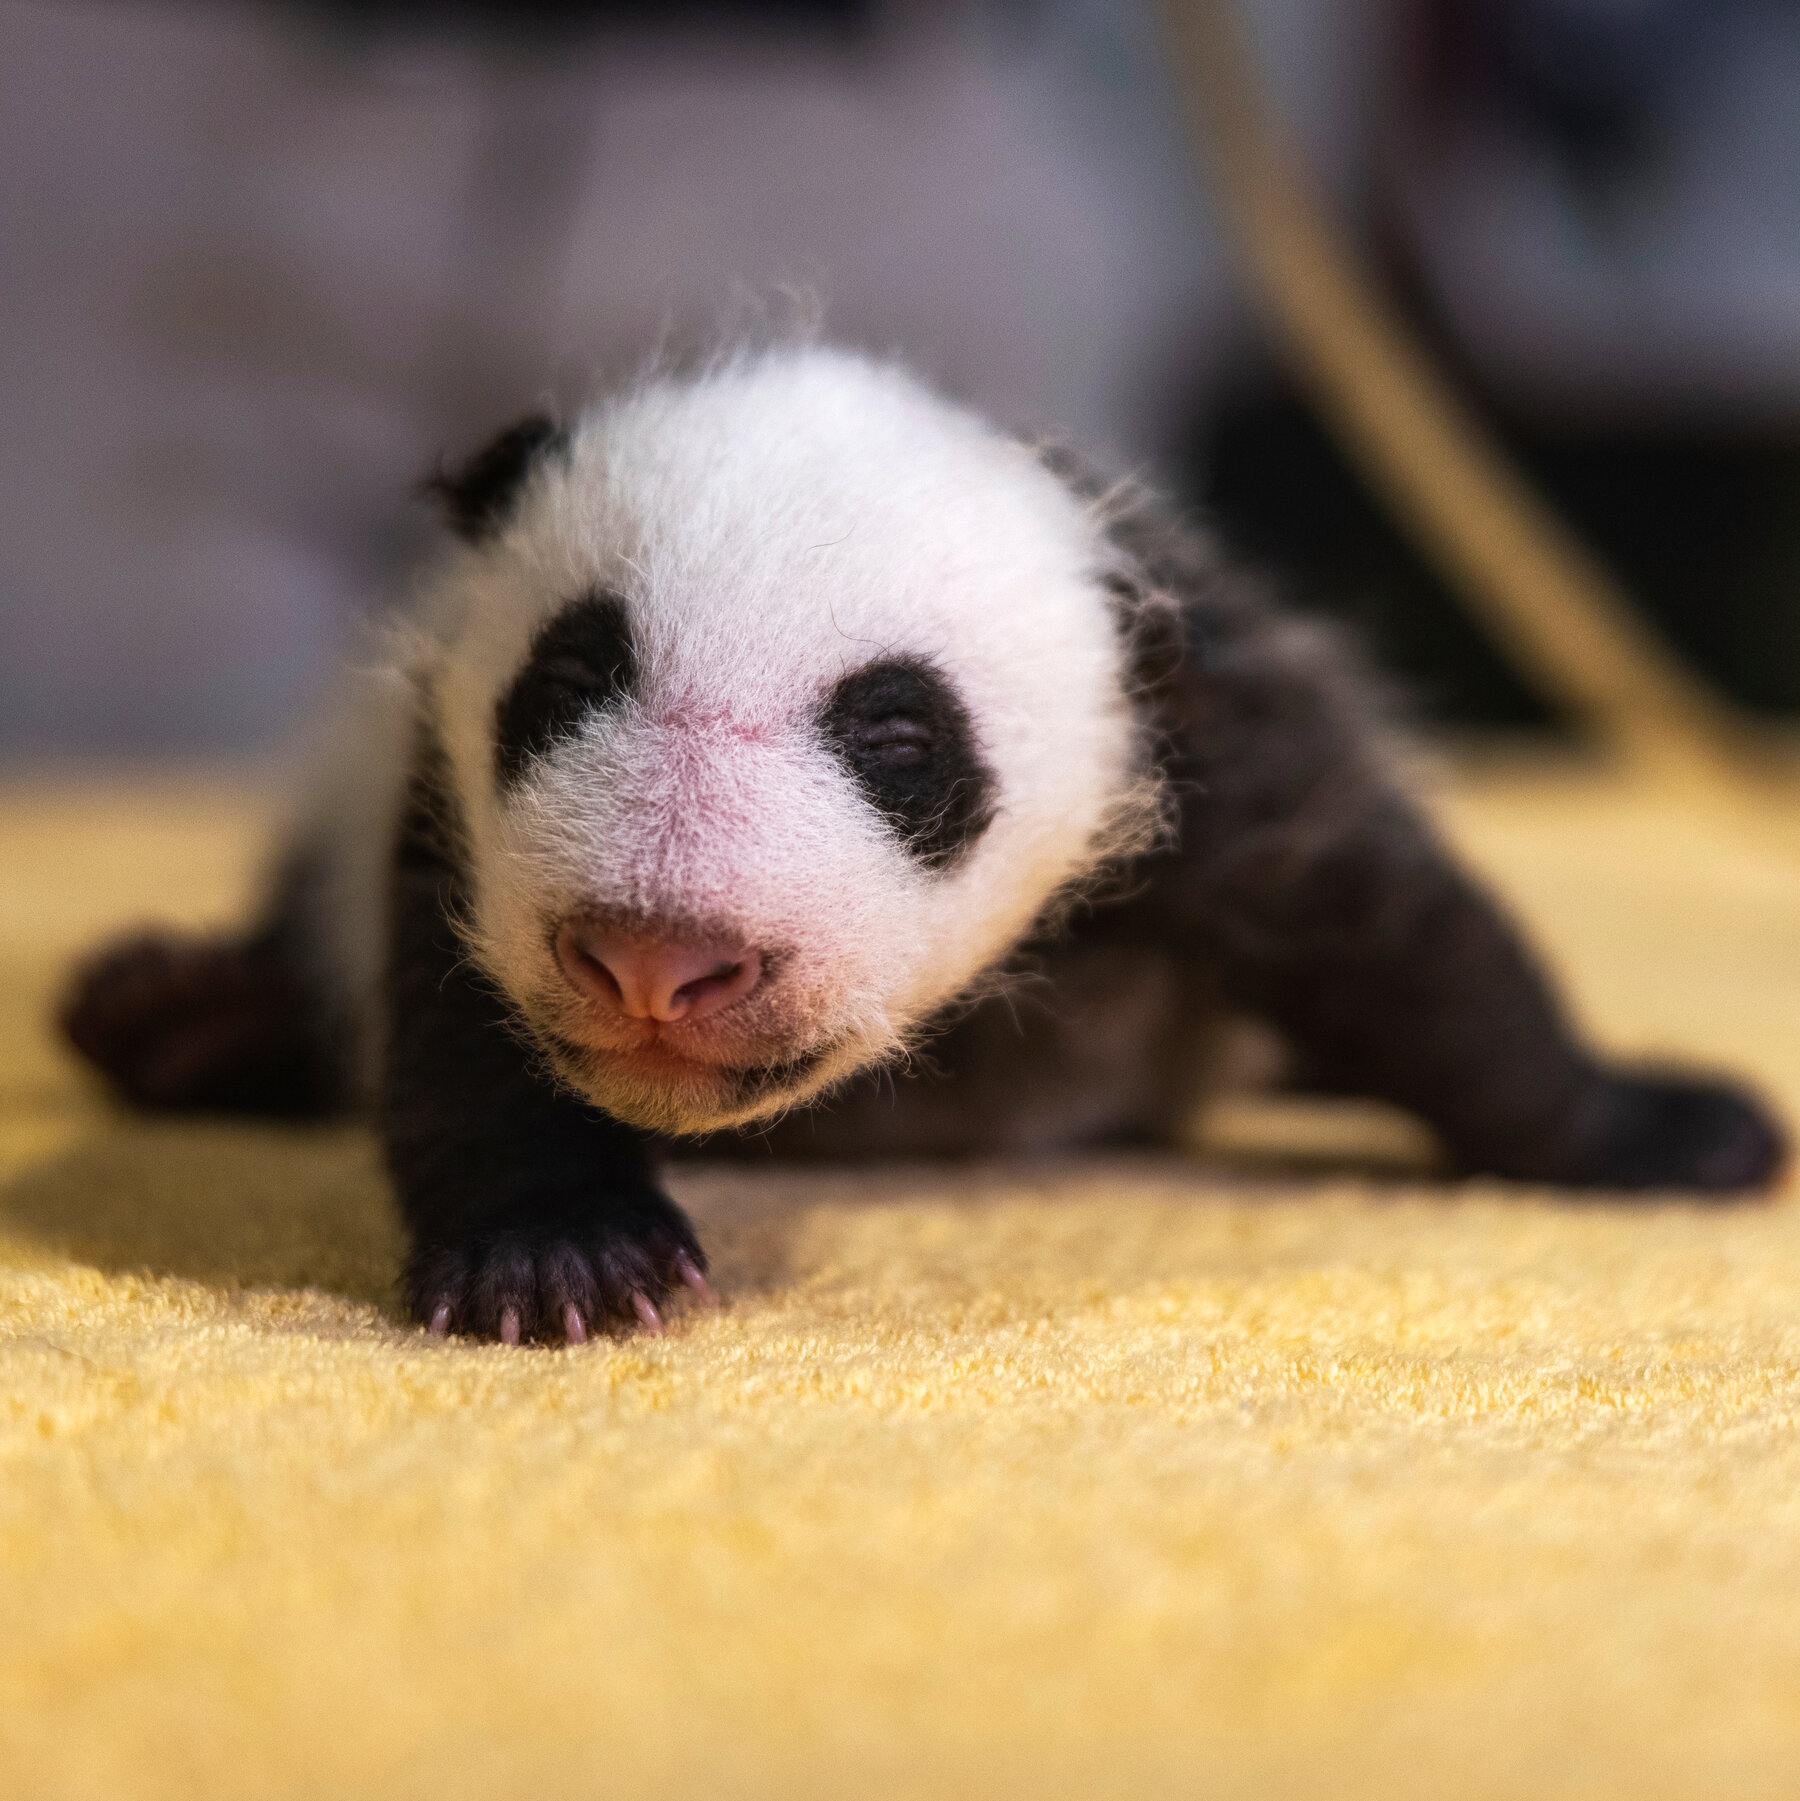 What is the name of the panda born in Washington DC?